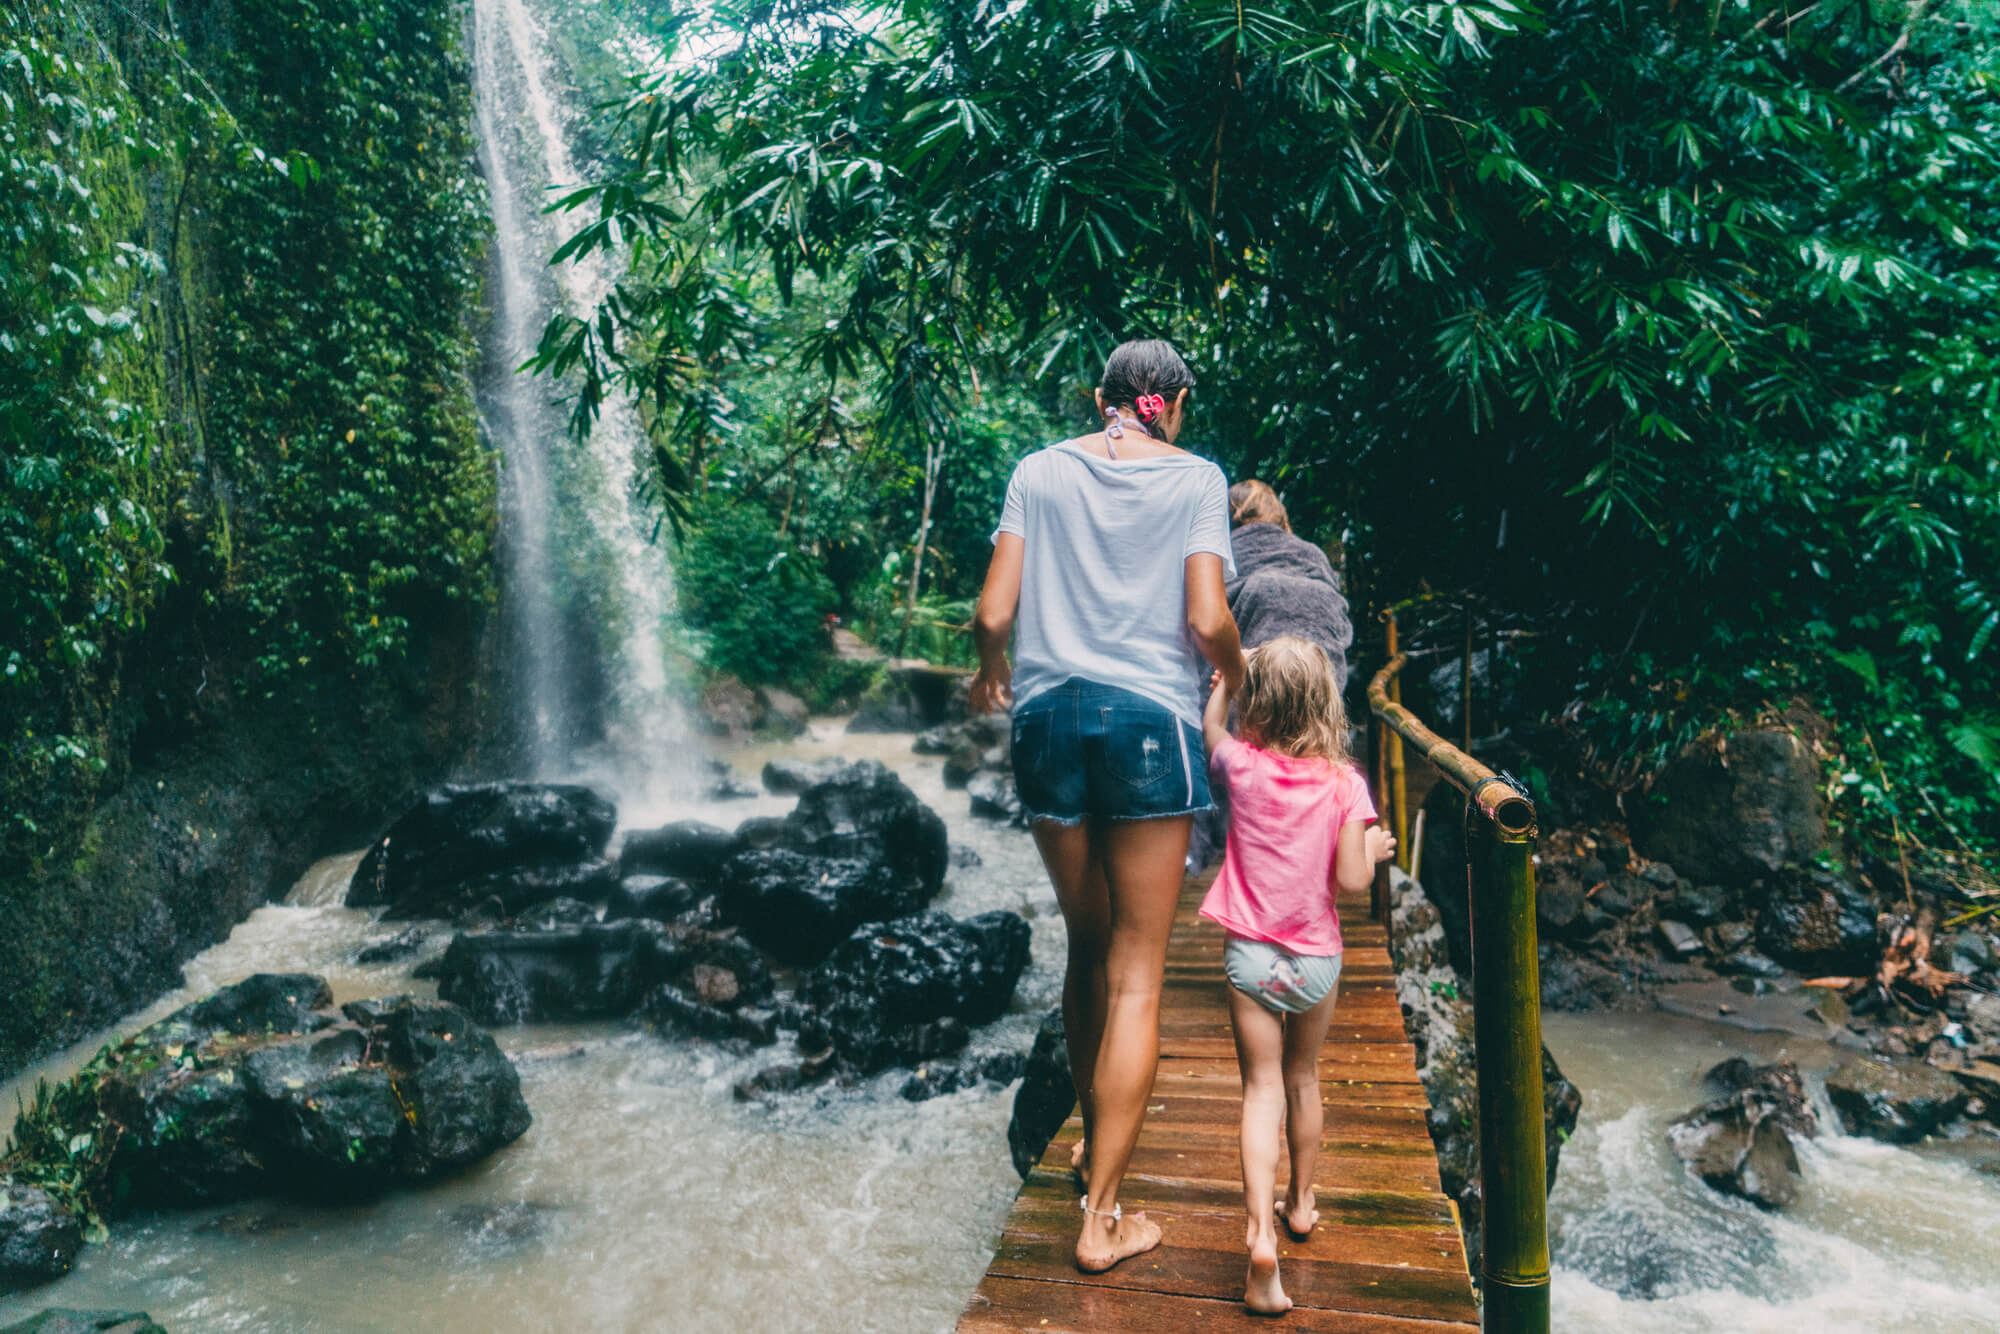 A family vacation in Bali